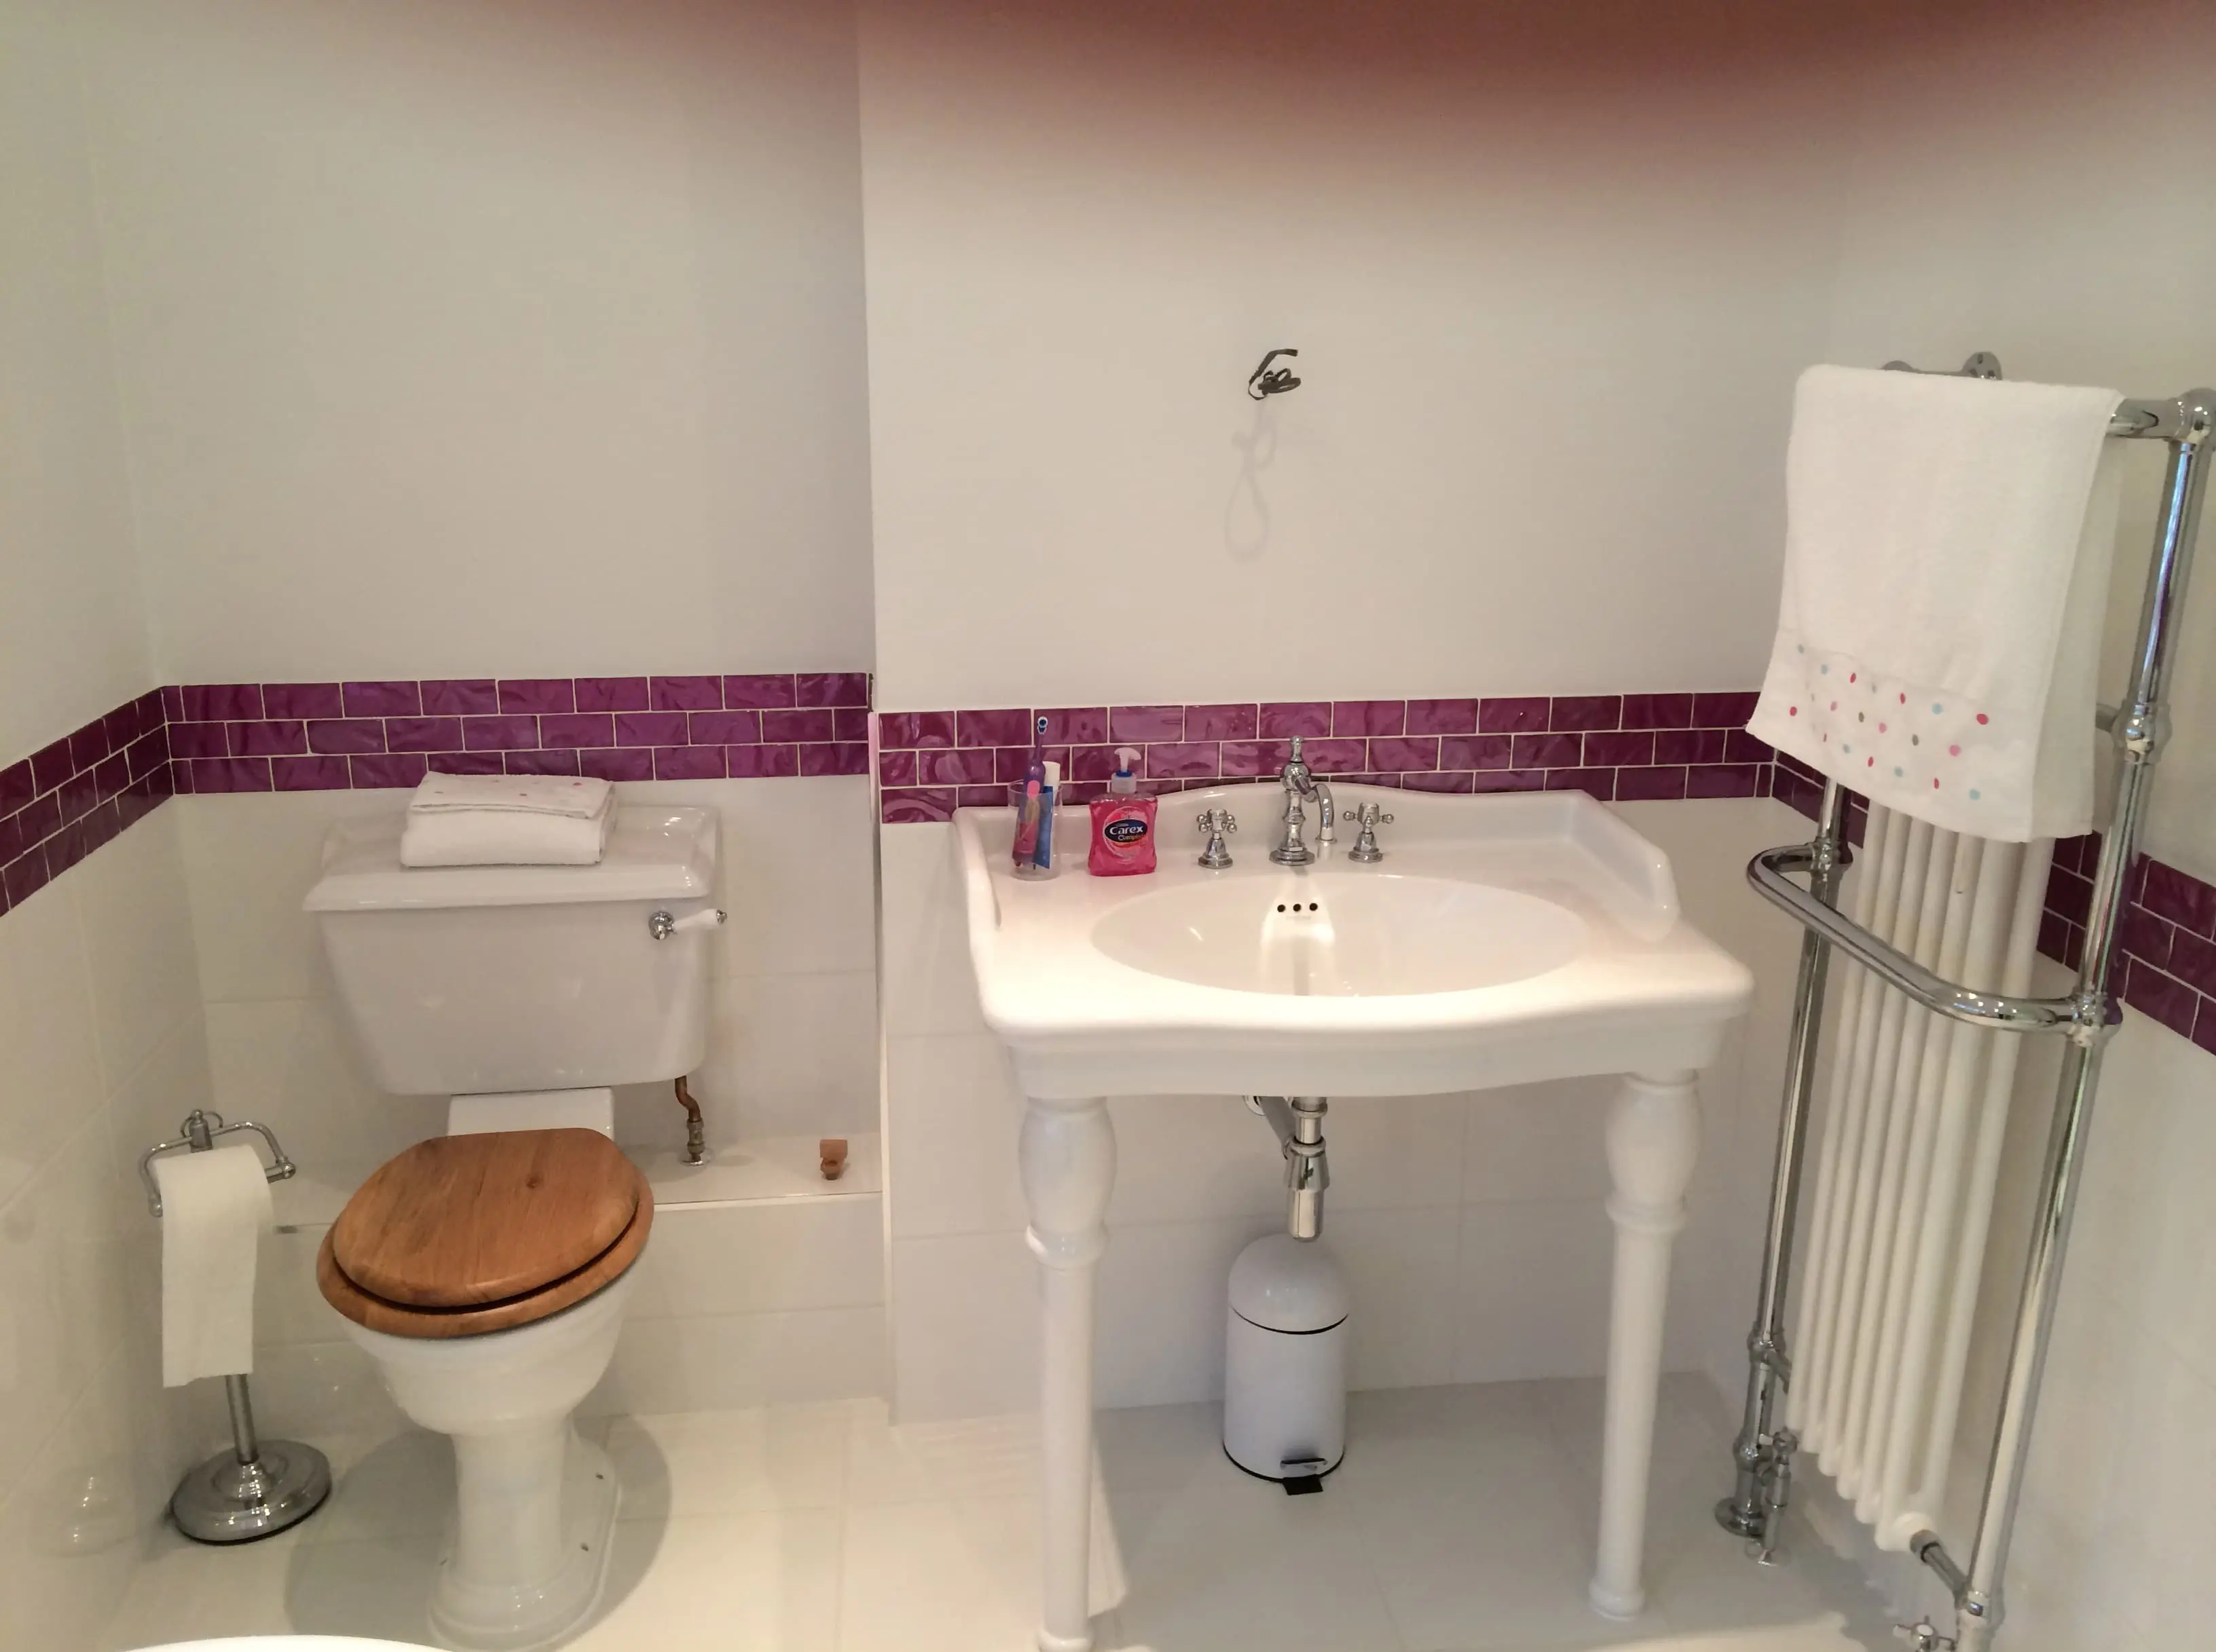 At Plumbing 4 U, we can tailor our tiling services&nbsp;to suit your budget.The team are fully qualified, with over 40 years of experience in the tiling industry, so you can be sure you are in good hands.&nbsp;In addition to tiling, we also offer plumbing and&nbsp;bathroom&nbsp;installations.Why not give us a&nbsp;call today to discuss your requirements for&nbsp;tiling services in Caversham?